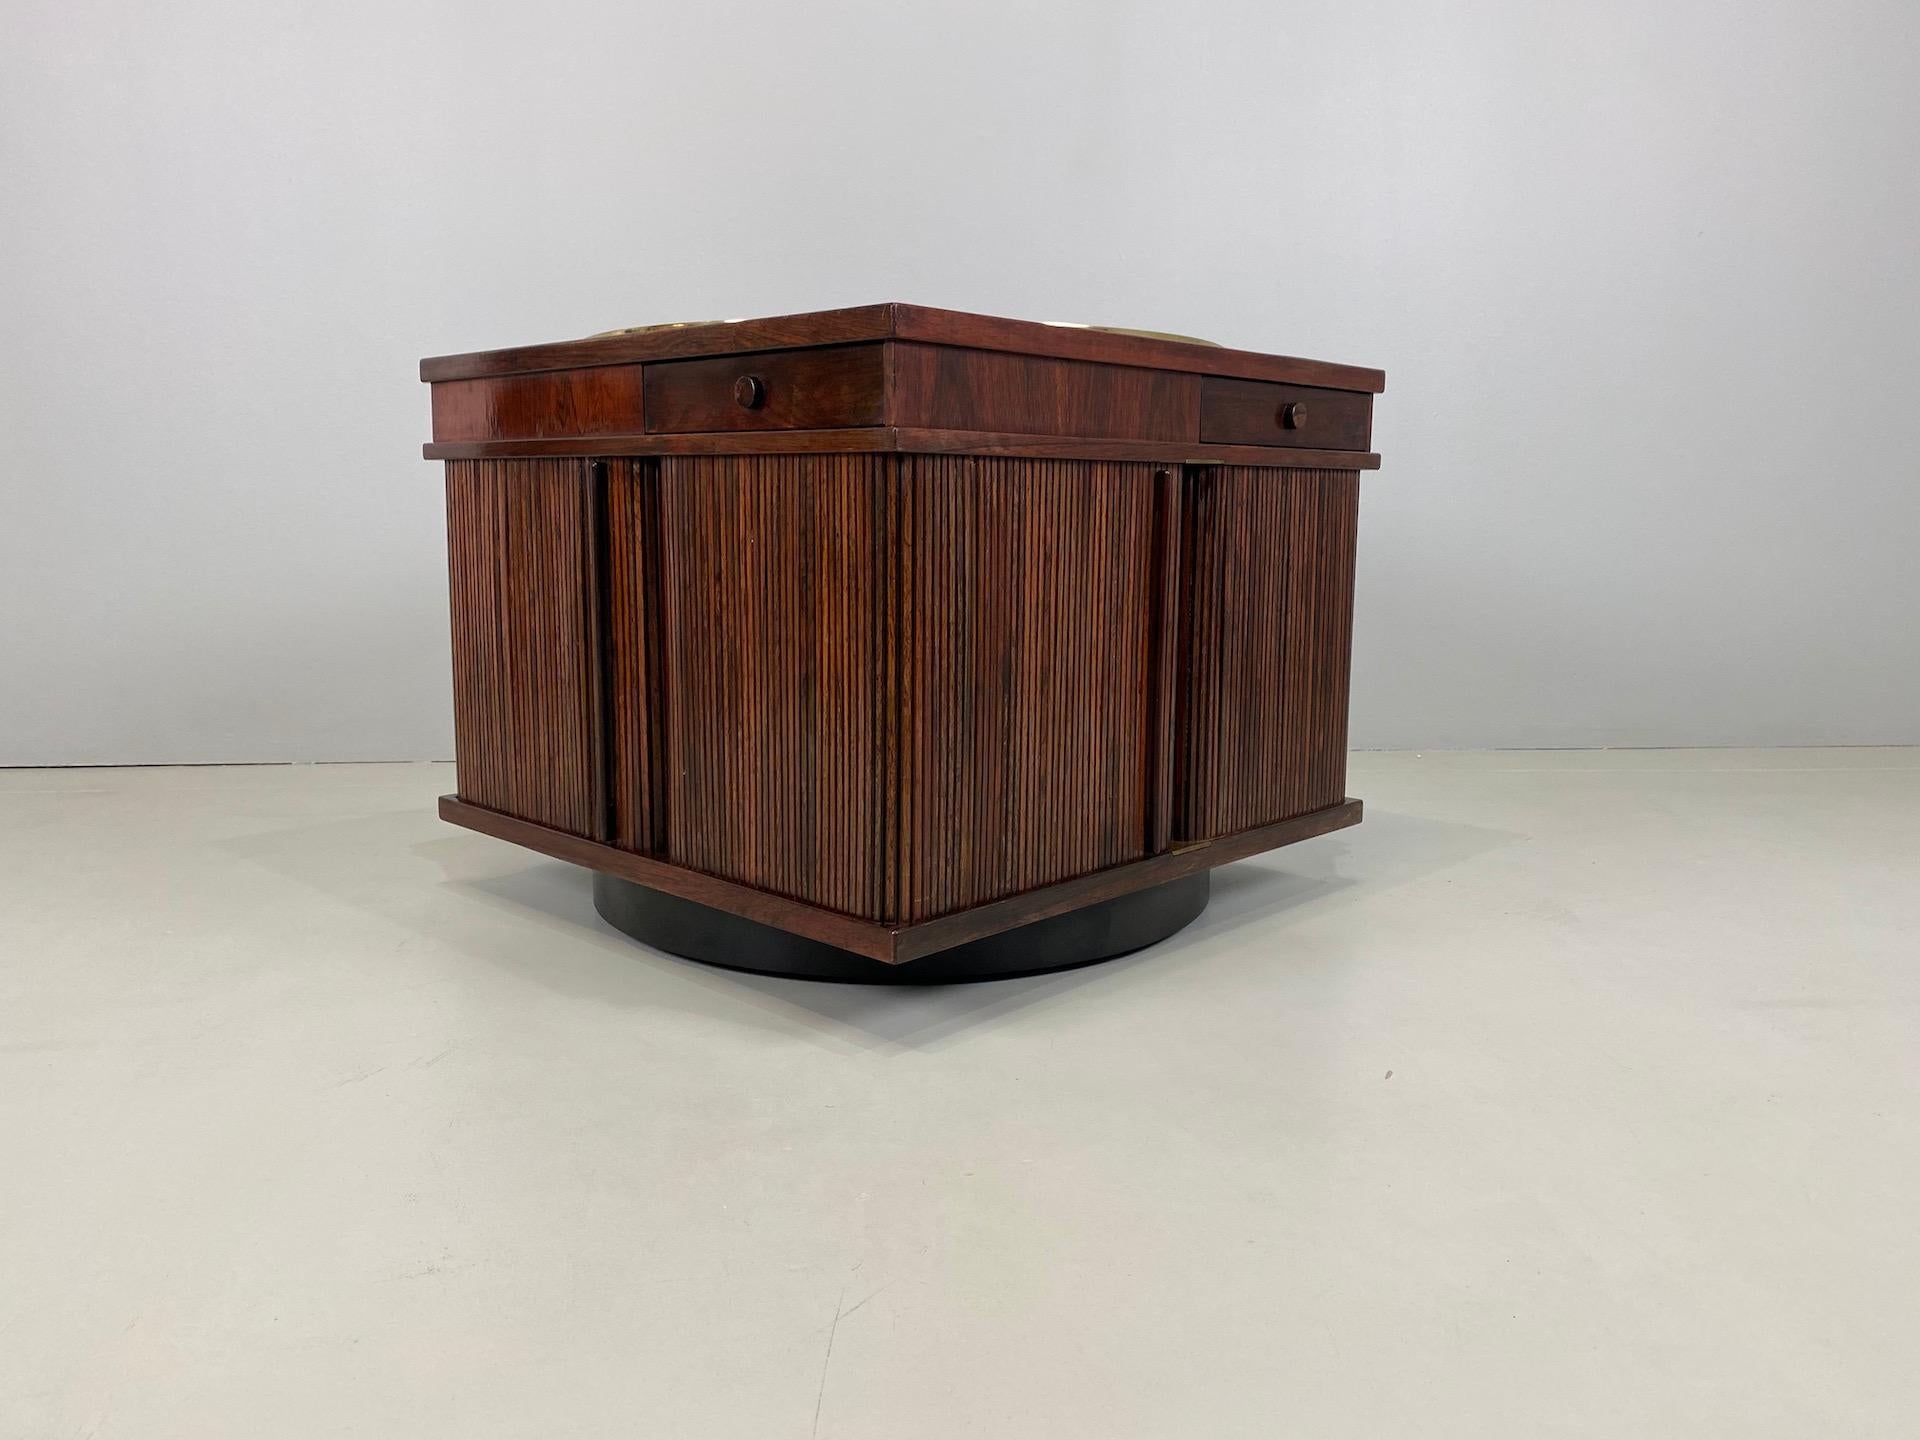 Gianfranco Frattini for Bernini, bar, side table, rosewood, Italy, 1960s. This bar in rosewood is designed by Frattini. It features the typical design traits of Frattini.
Original label.